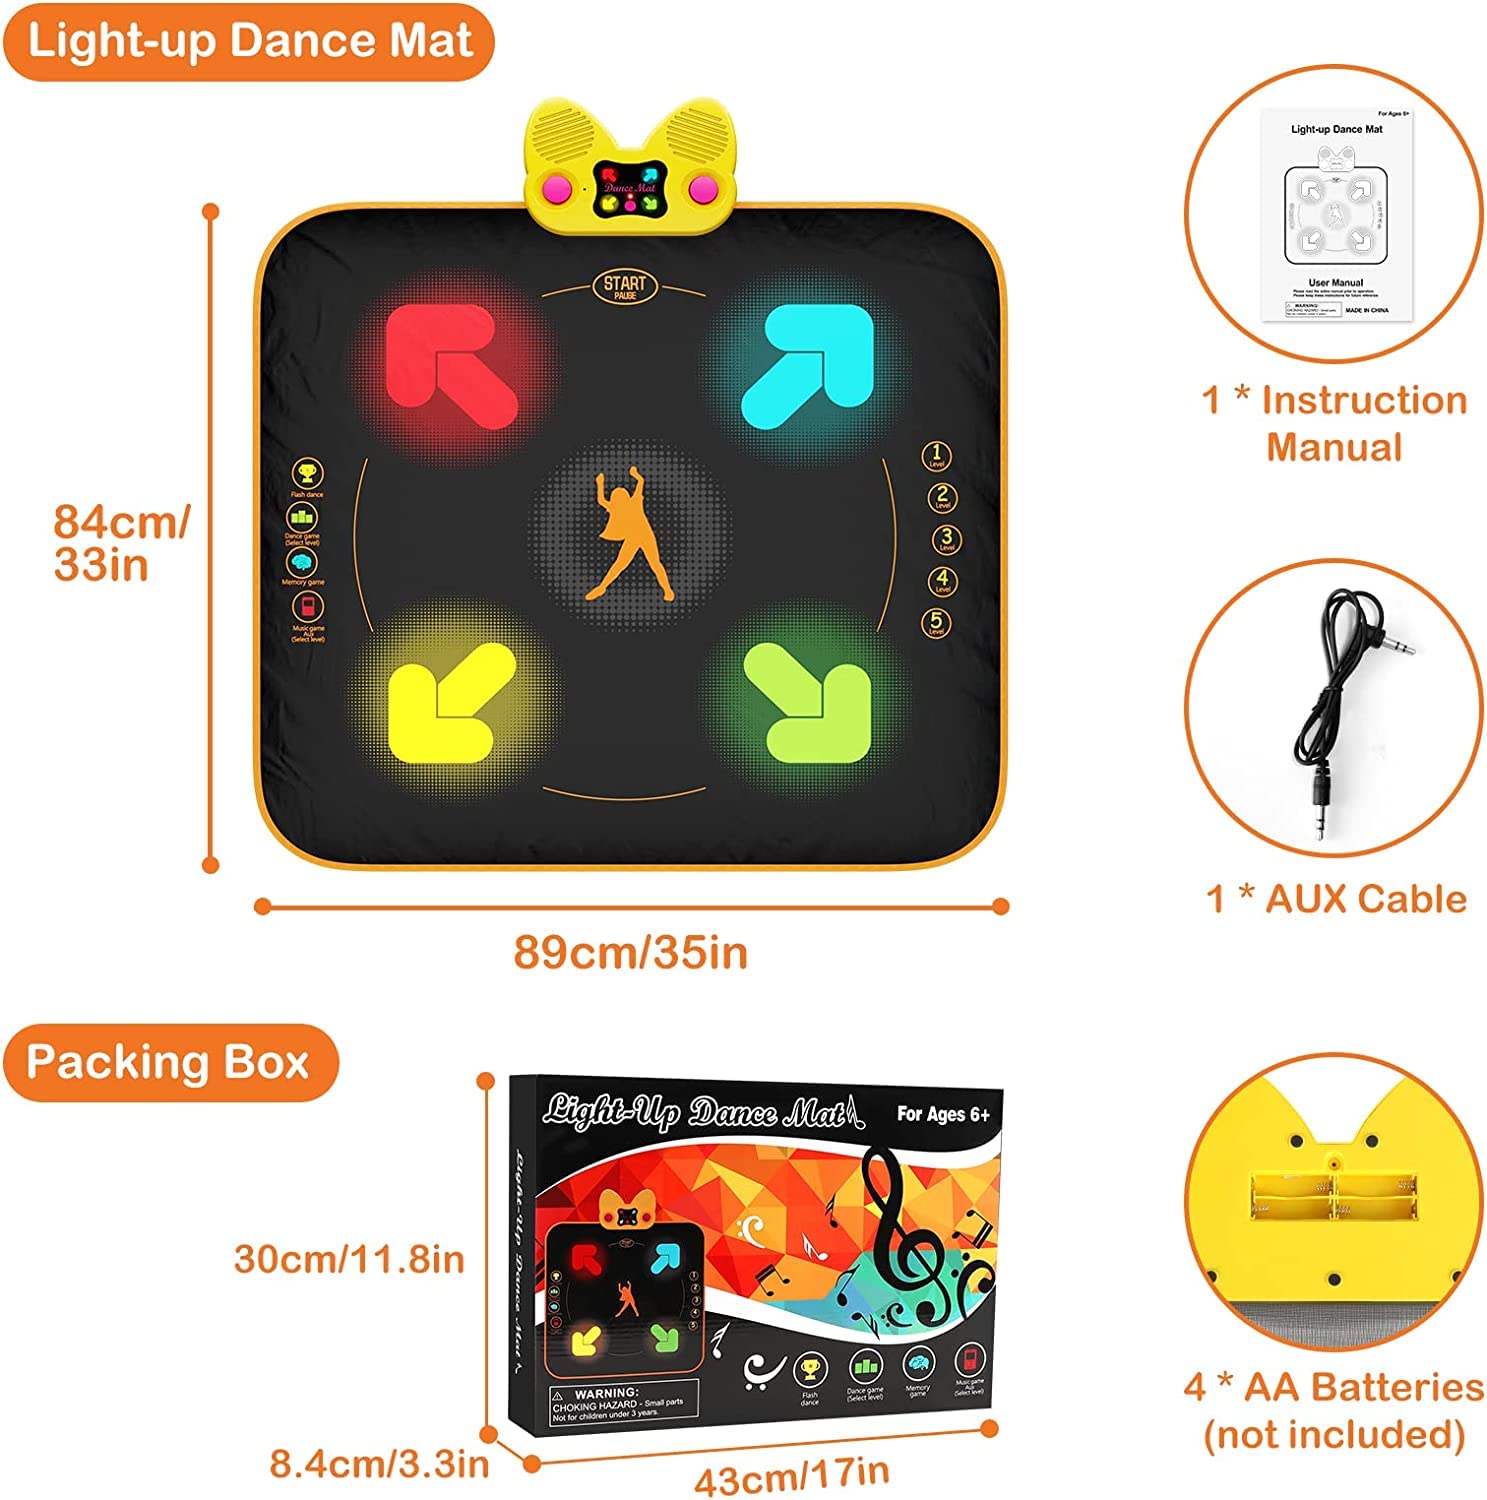 Dance Mat Toys for Kids Ages 4-12, Dance Pad with Light-up 4 Buttons, Wireless Bluetooth, AUX, Built-in Music, 4 Game Modes, 5 Challenge Levels | Christmas Birthday Gift for 4 5 6 7 8+ Year Old Girls